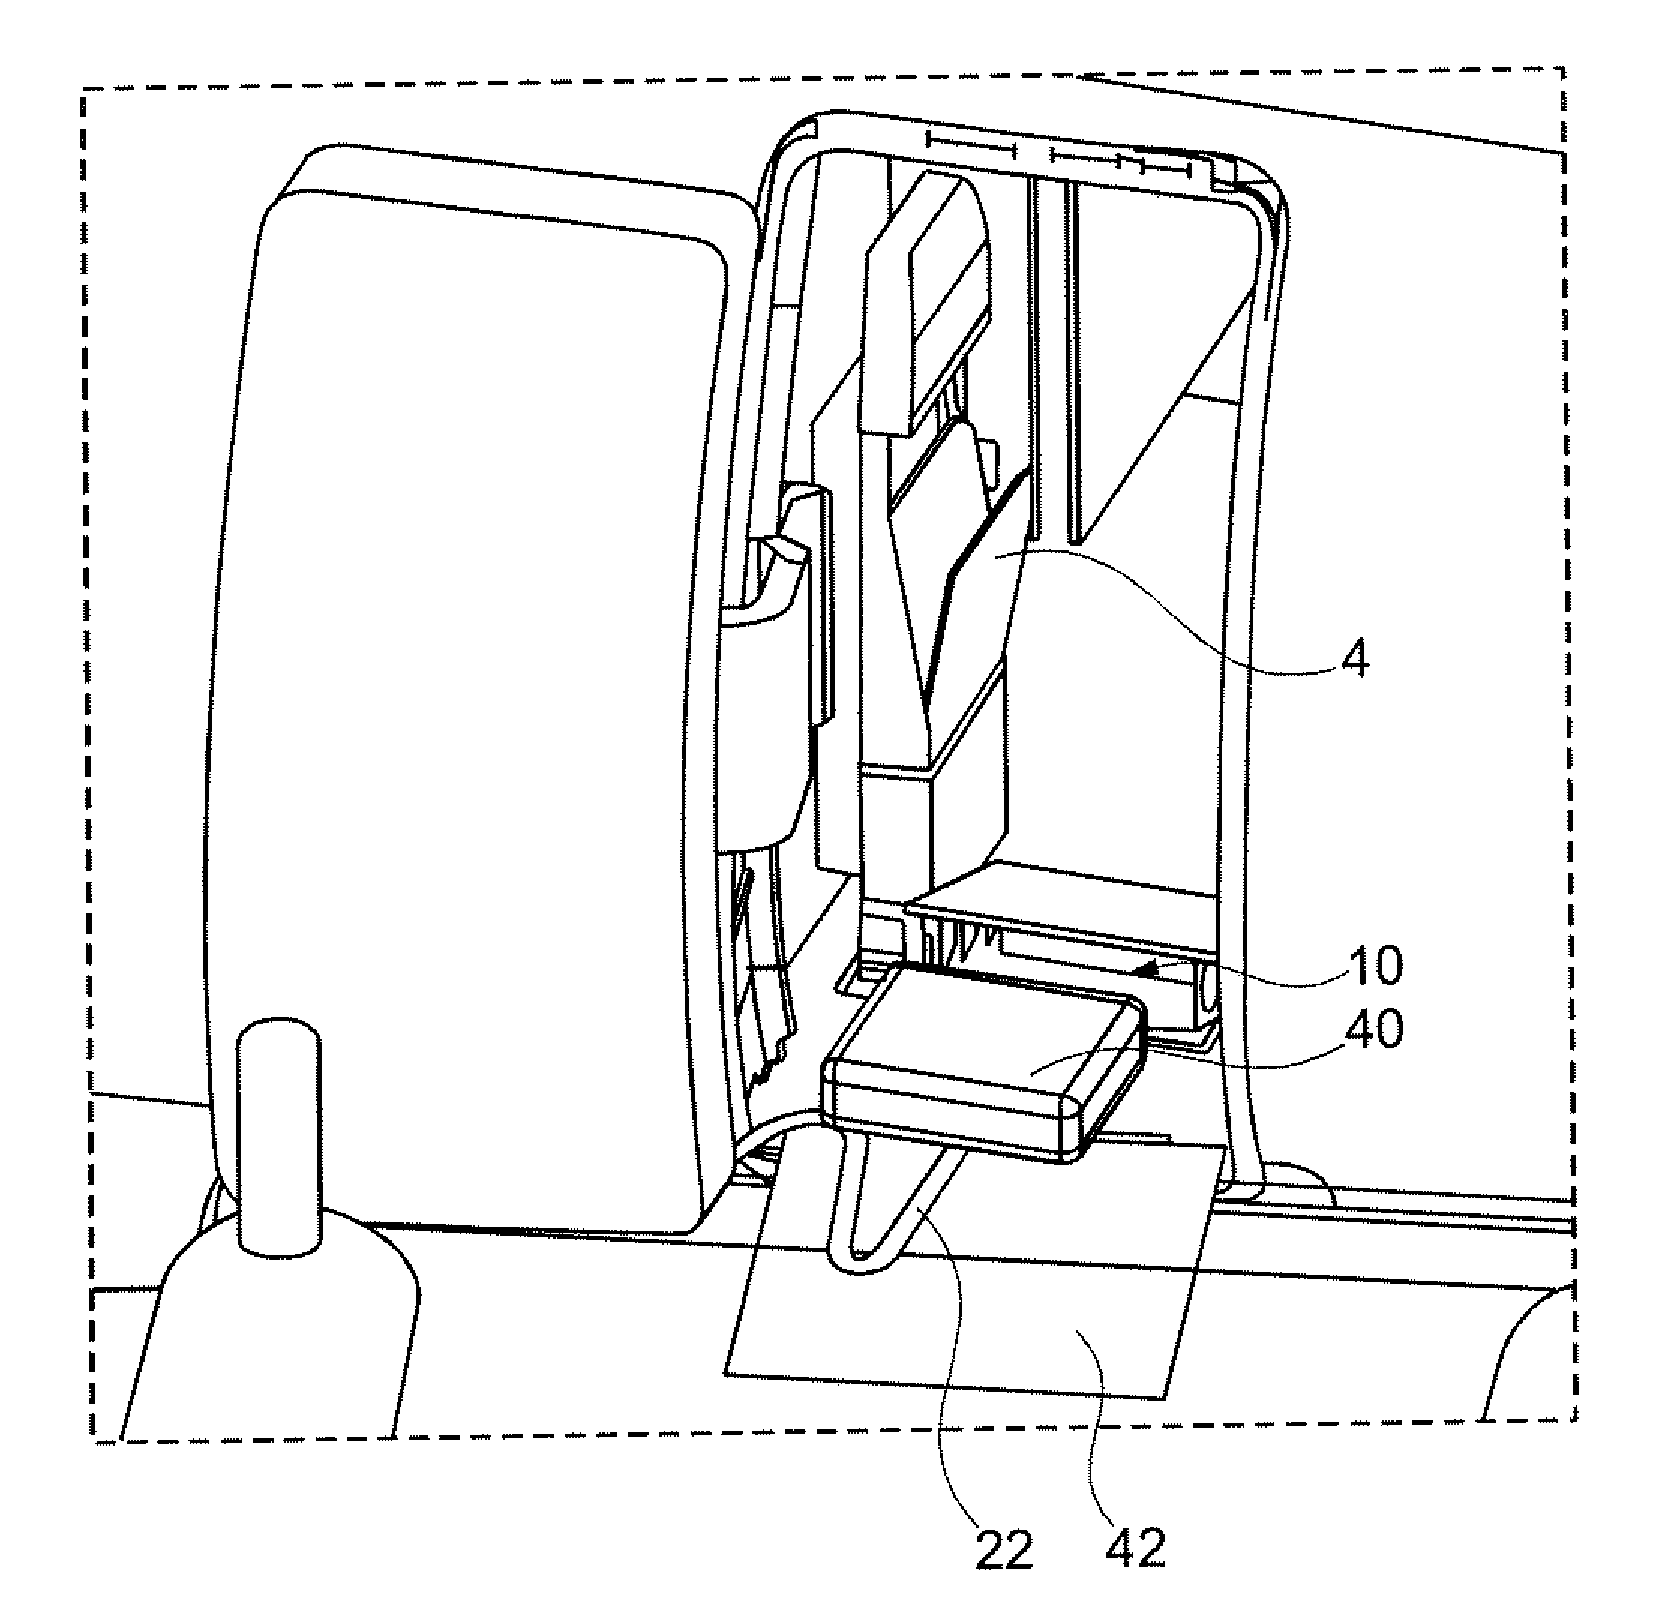 Assembly and method for stowing away and removing a survival kit in a passenger cabin of an aircraft